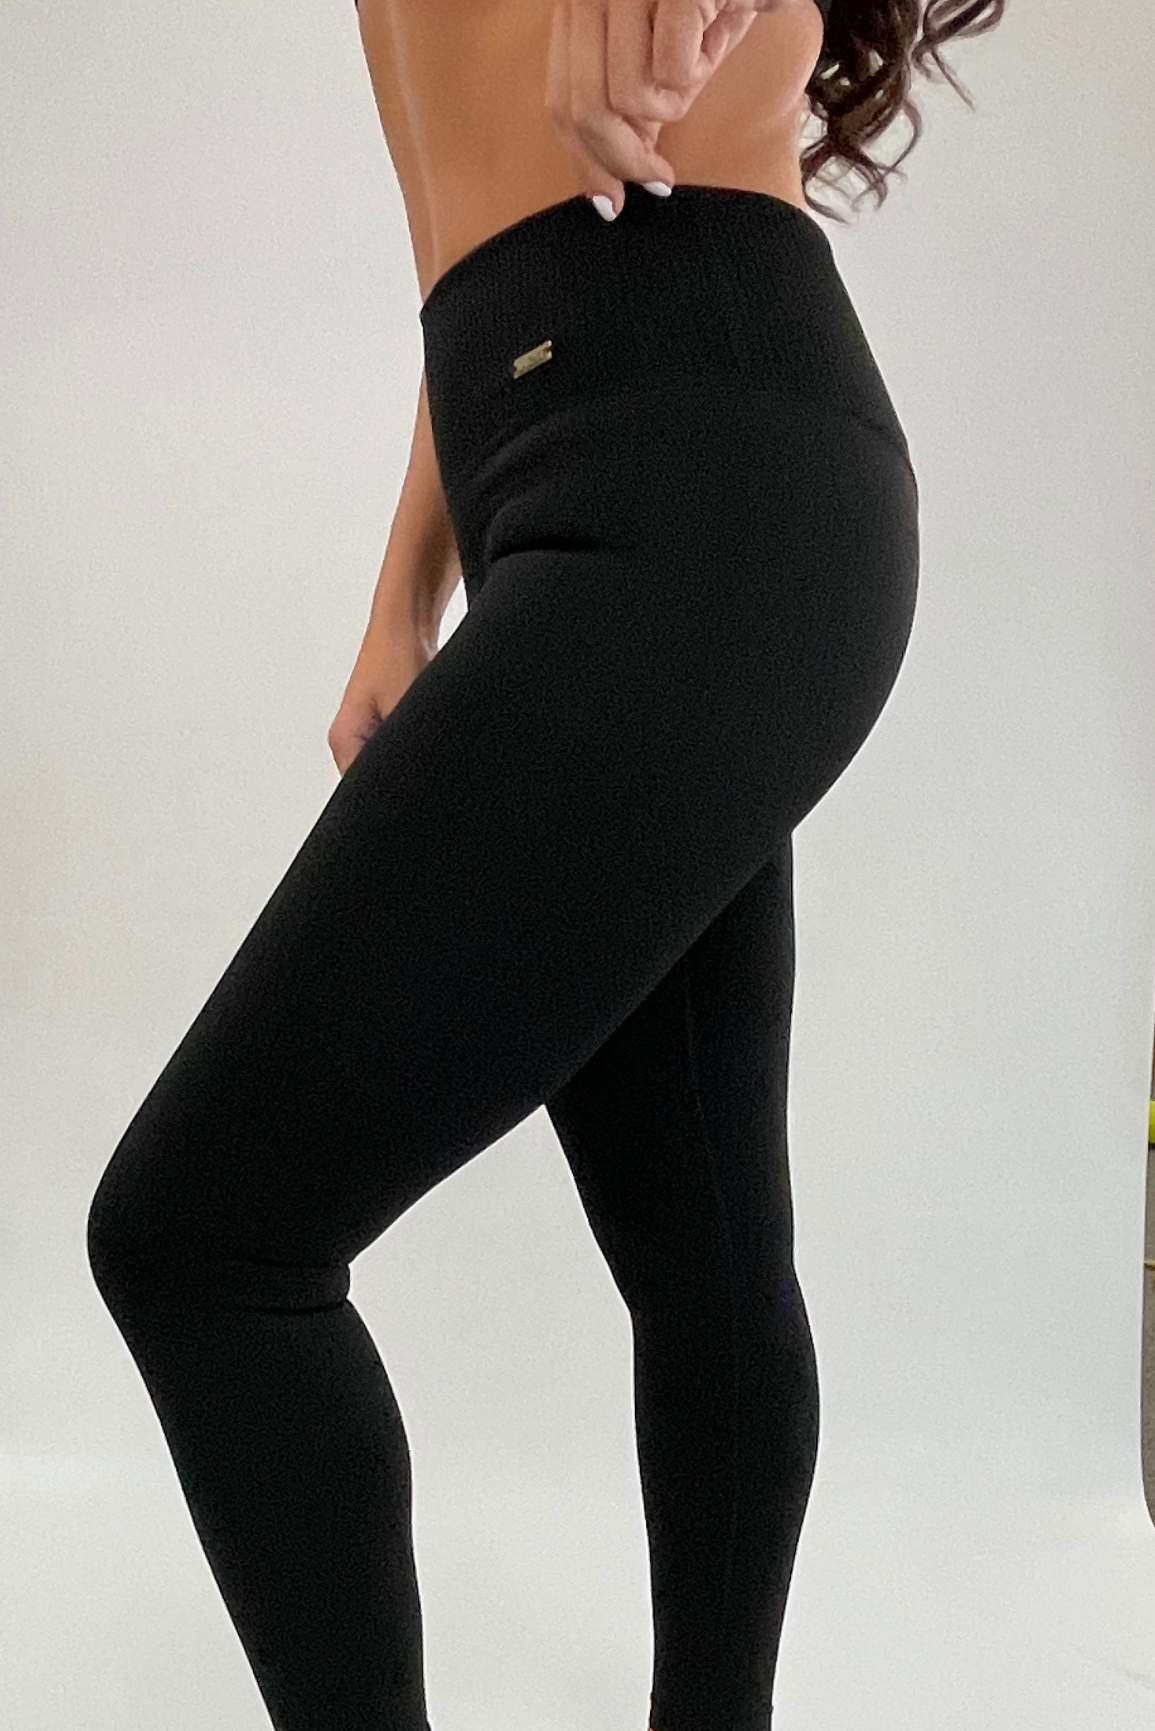 Guess Black Leggings  International Society of Precision Agriculture